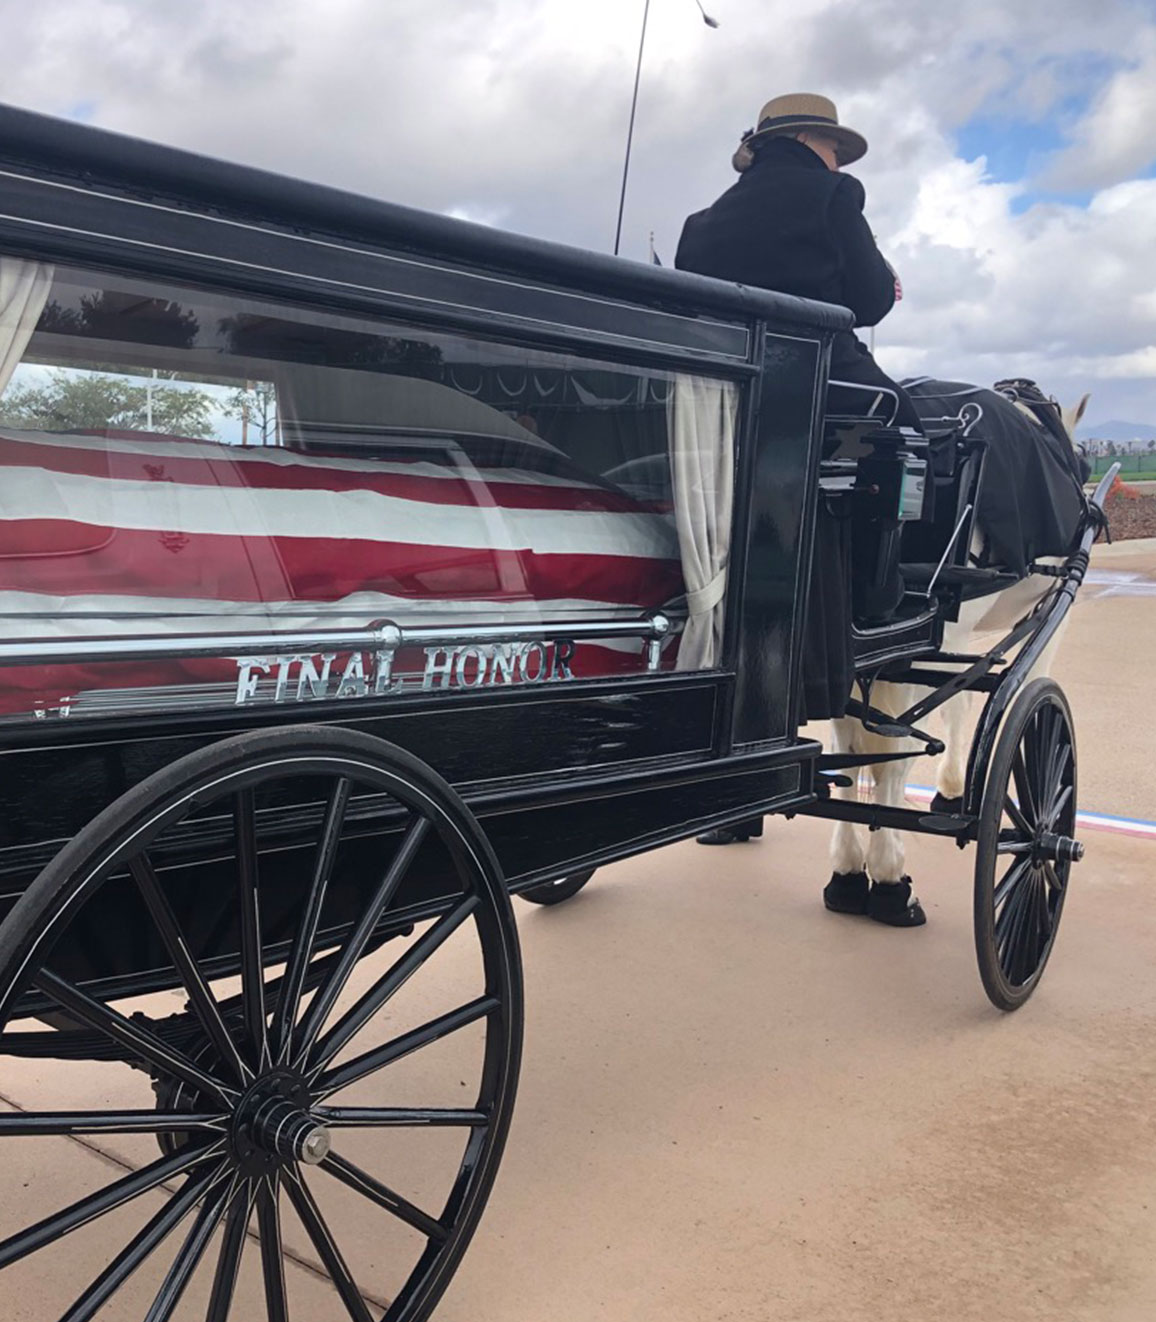 Funeral Homes Mission Valley San Diego